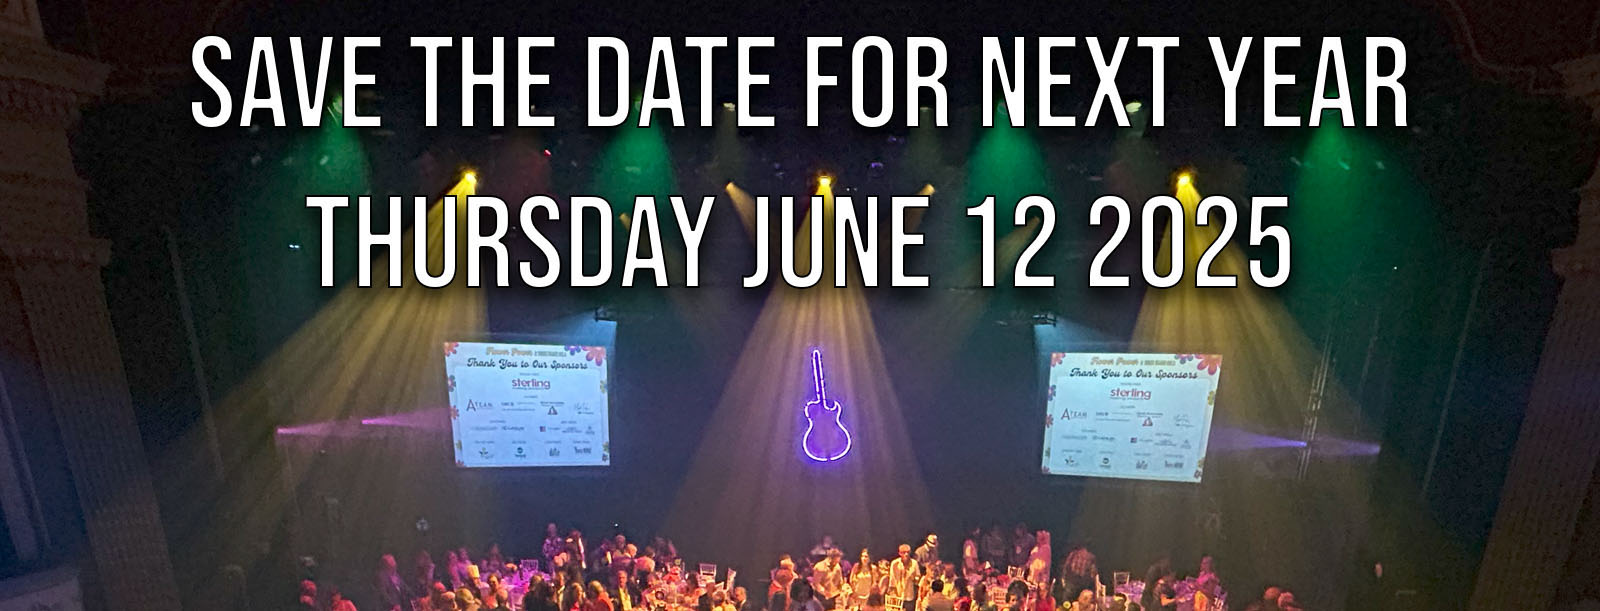 Save the Date for the 2025 Grand Gala, June 12 2025